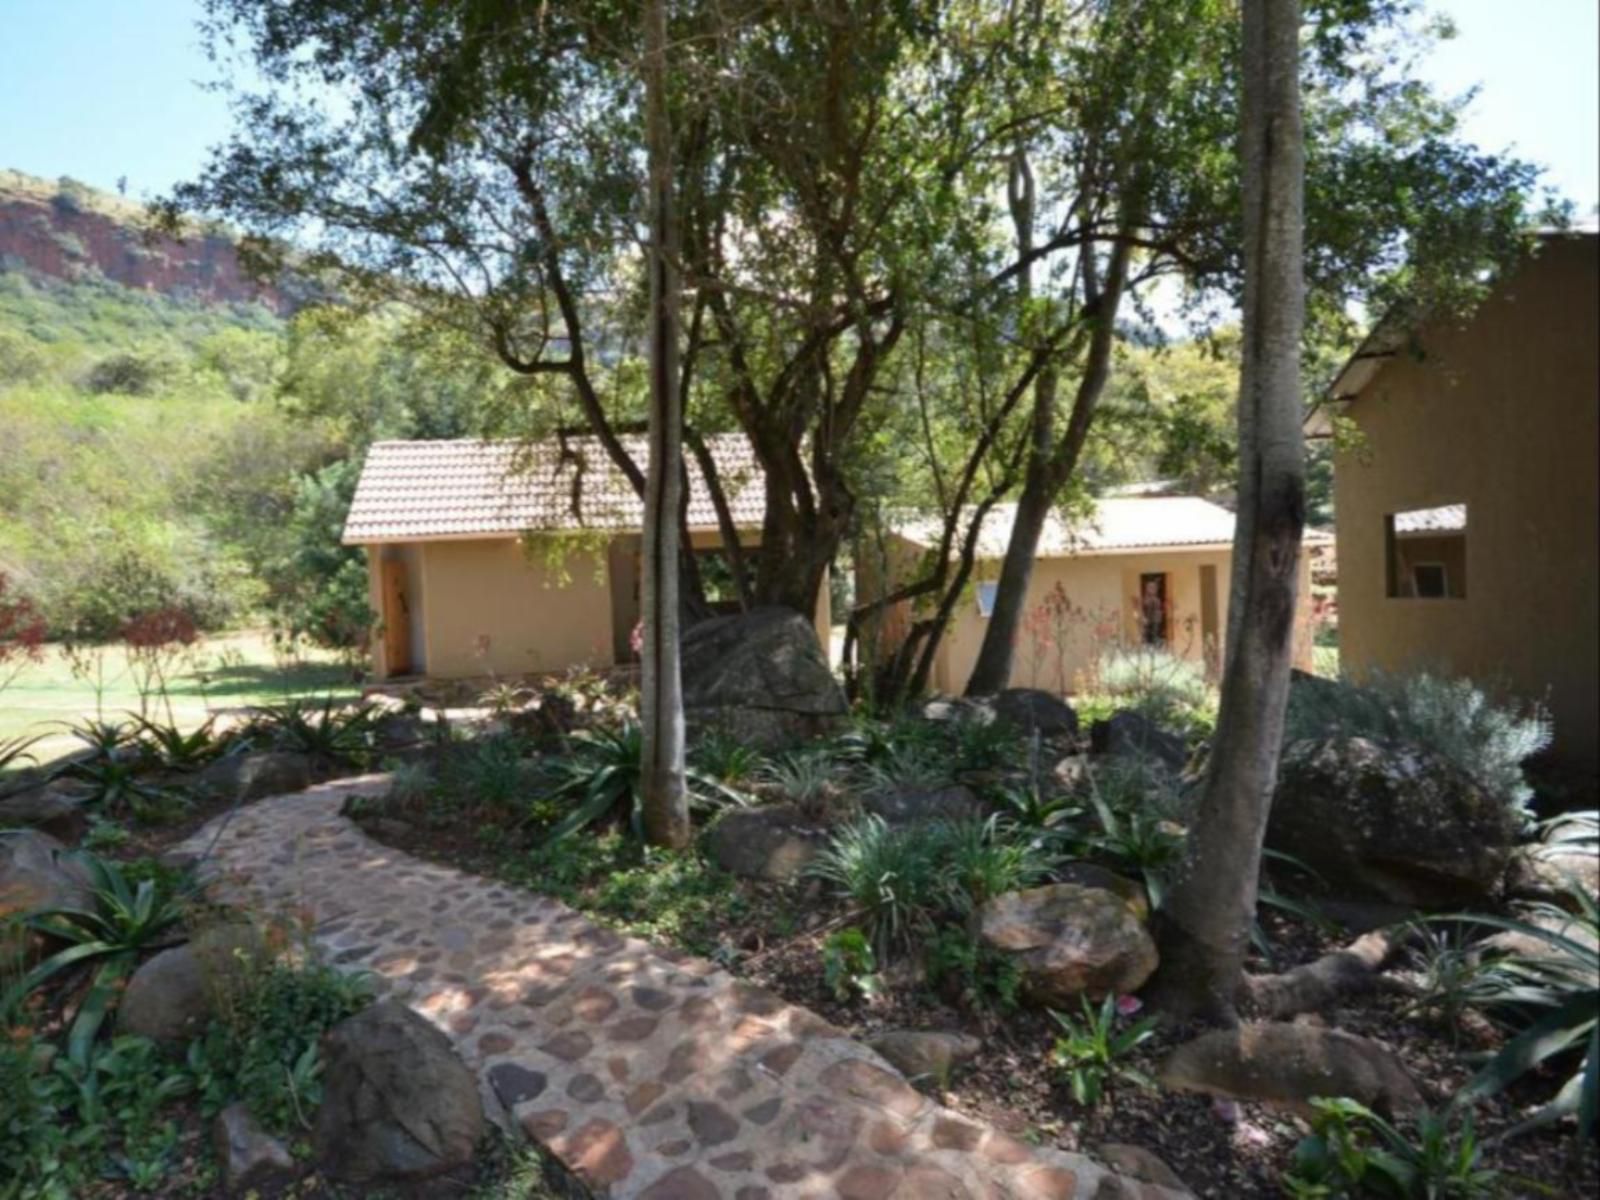 Rocky Drift Private Nature Reserve Waterval Boven Mpumalanga South Africa House, Building, Architecture, Palm Tree, Plant, Nature, Wood, Garden